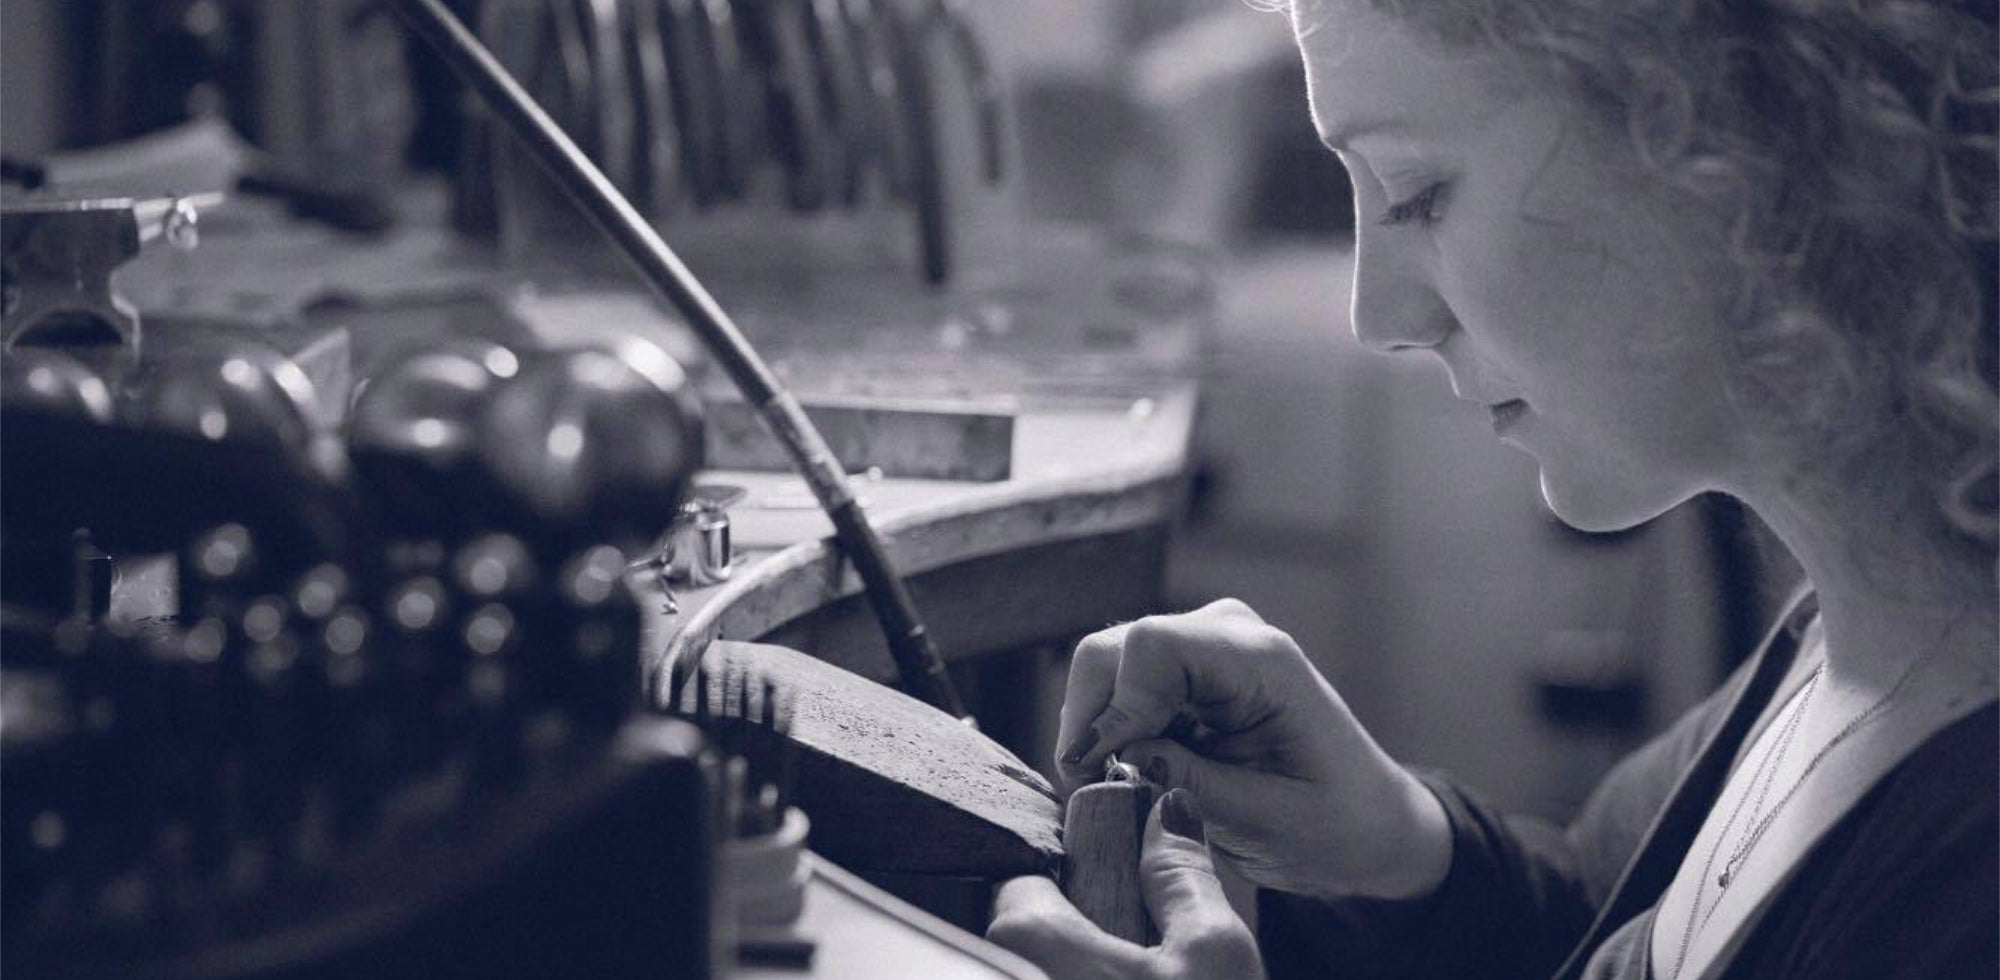 Independent jeweller Erin Cox crafting a bespoke engagement ring at her workbench in Devon